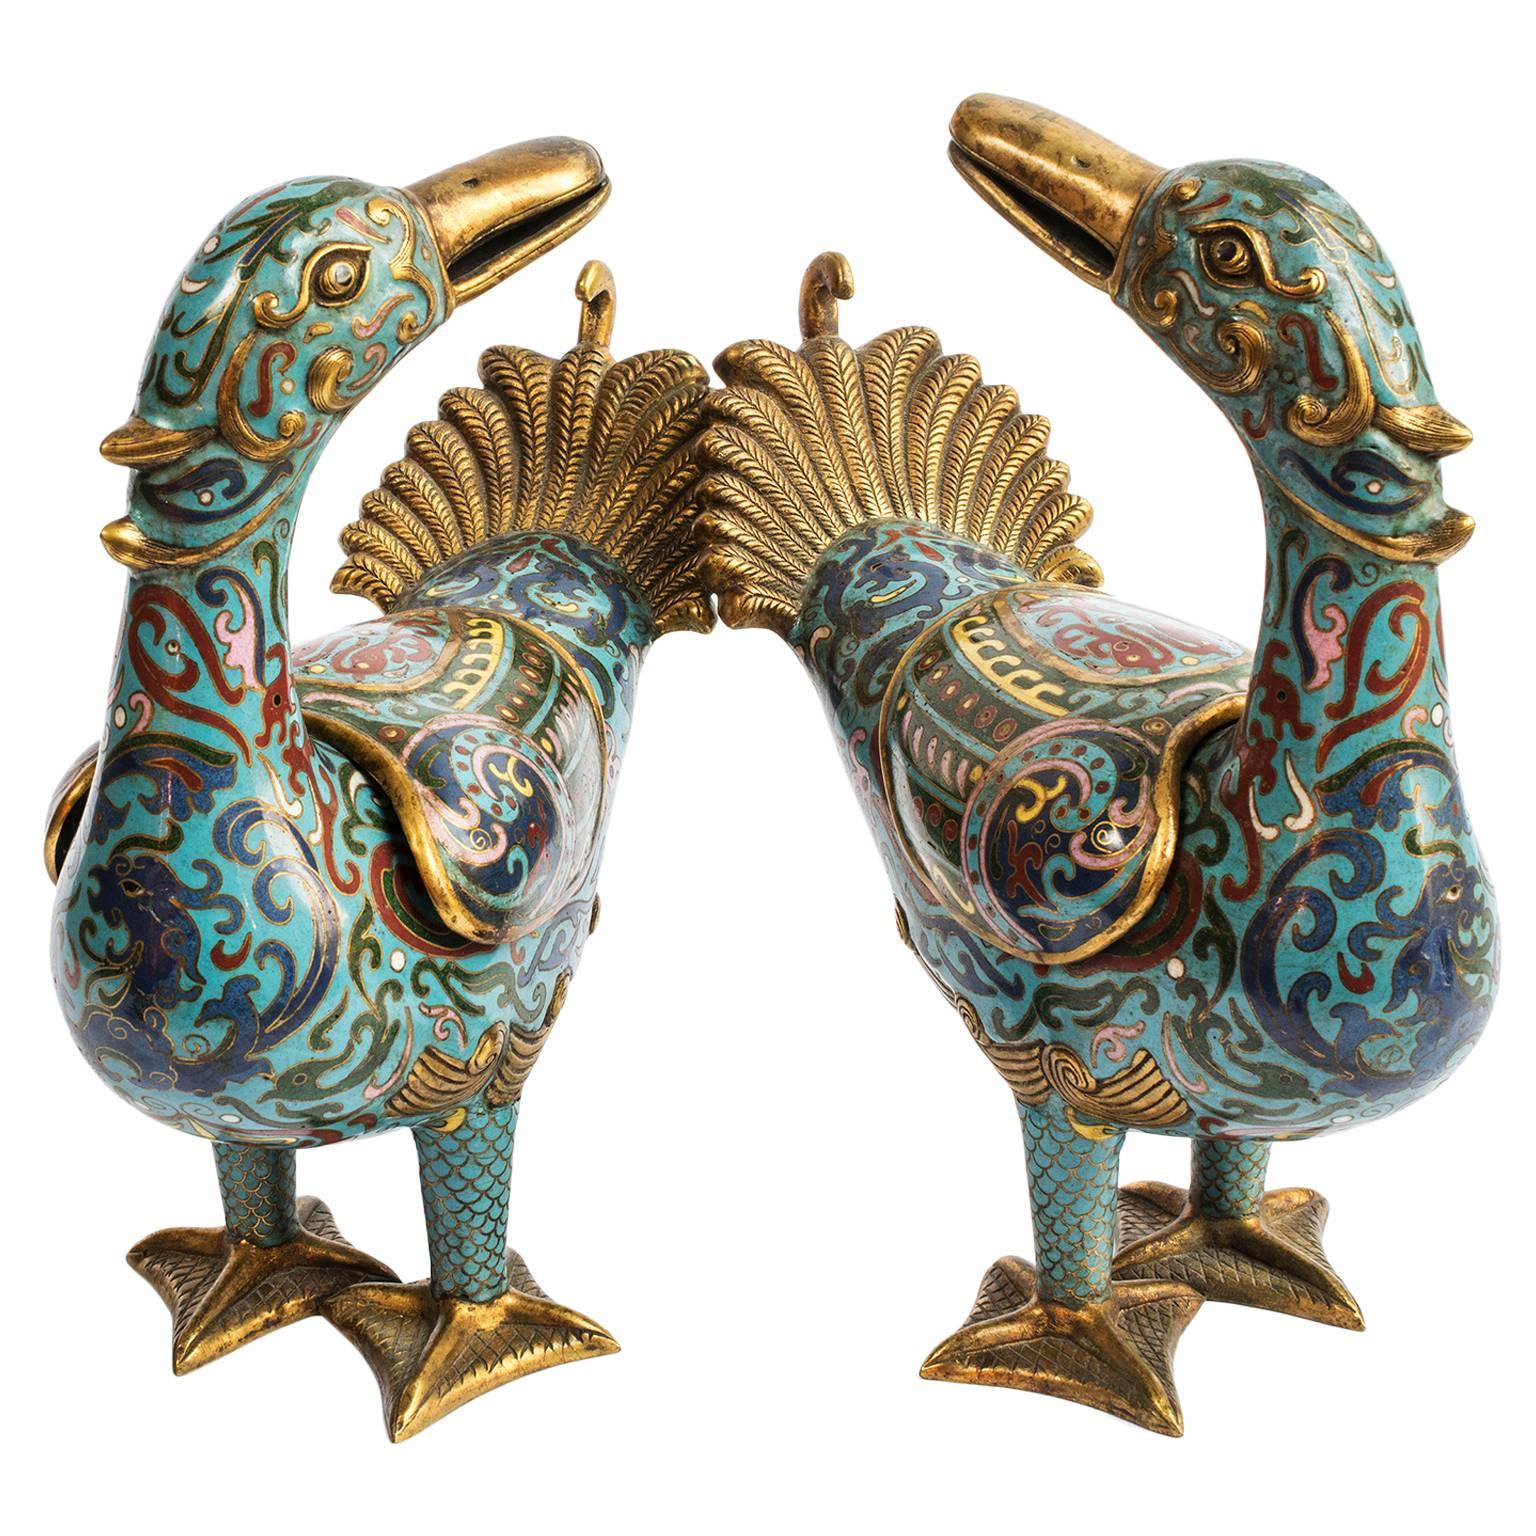 Pair of early 20th C. Cloisonne Ducks